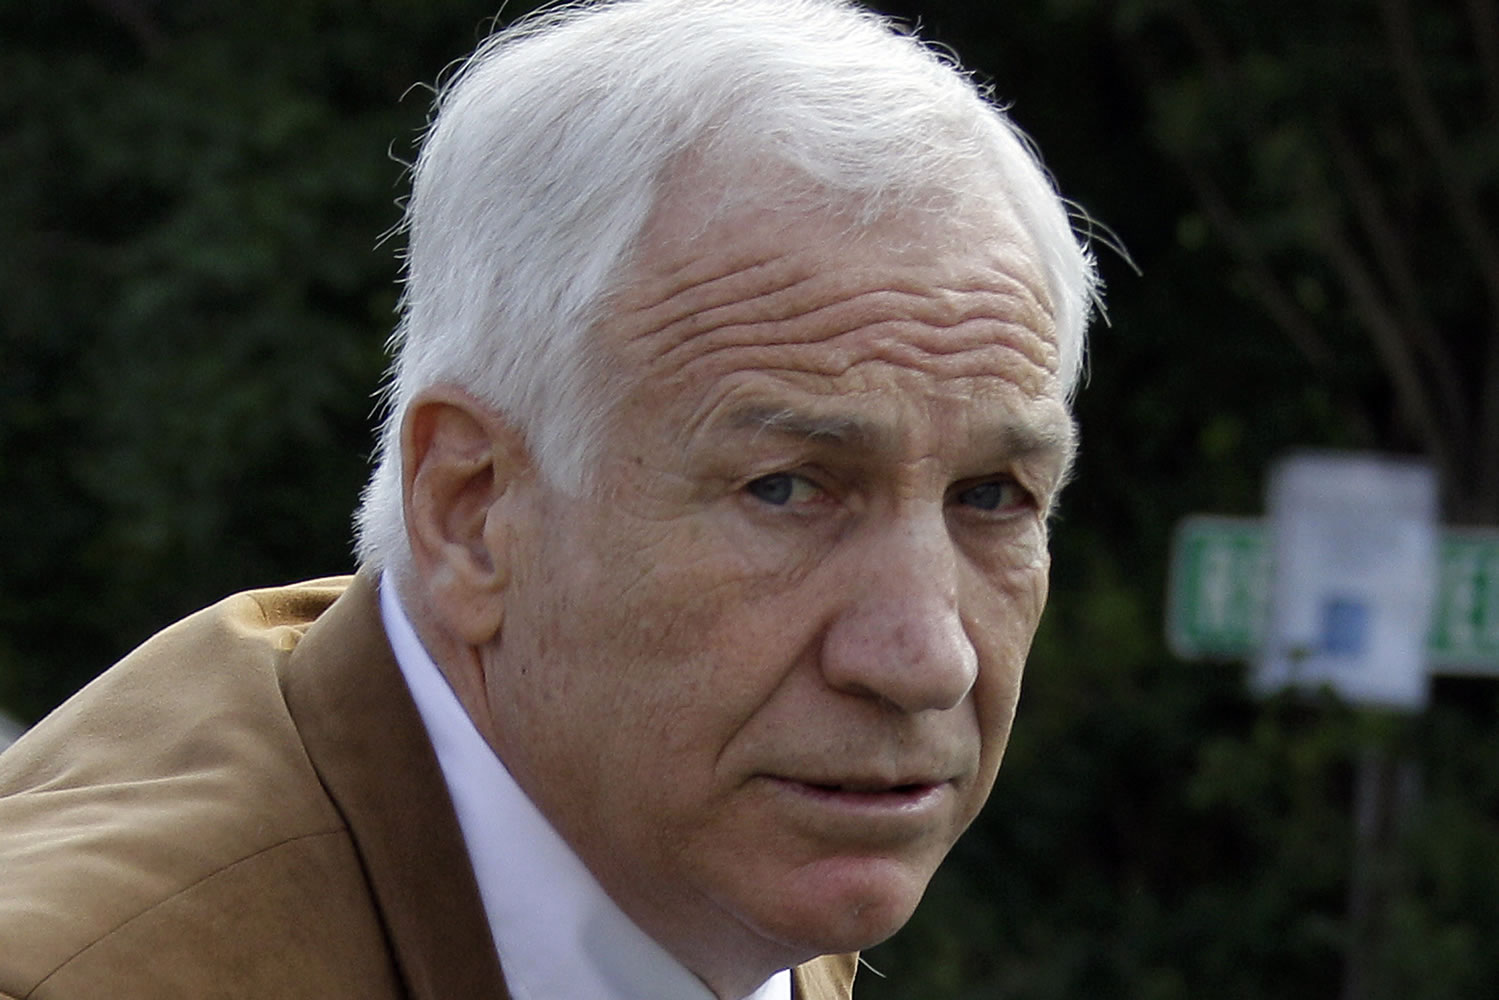 Former Penn State assistant football coach Jerry Sandusky arrives at the Centre County Courthouse in Bellefonte, Pa., on June 22, 2012.